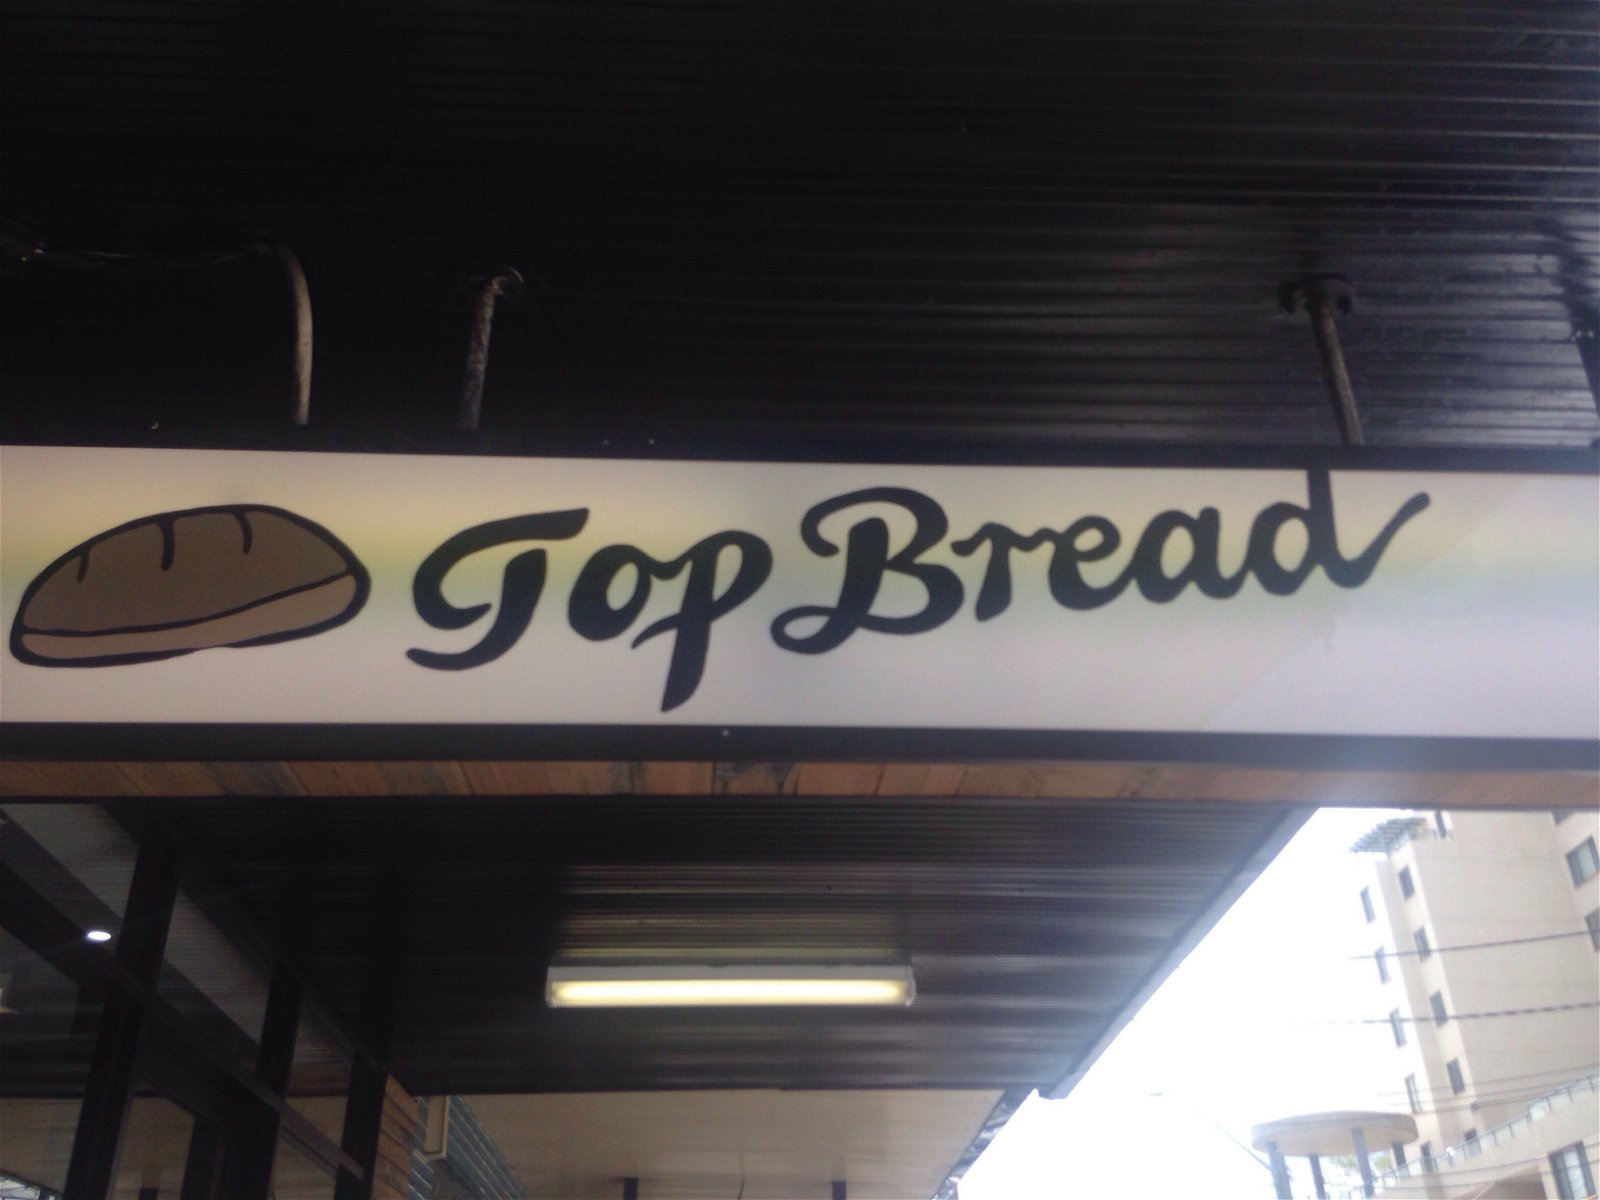 Top bread - West Ryde - New South Wales Tourism 